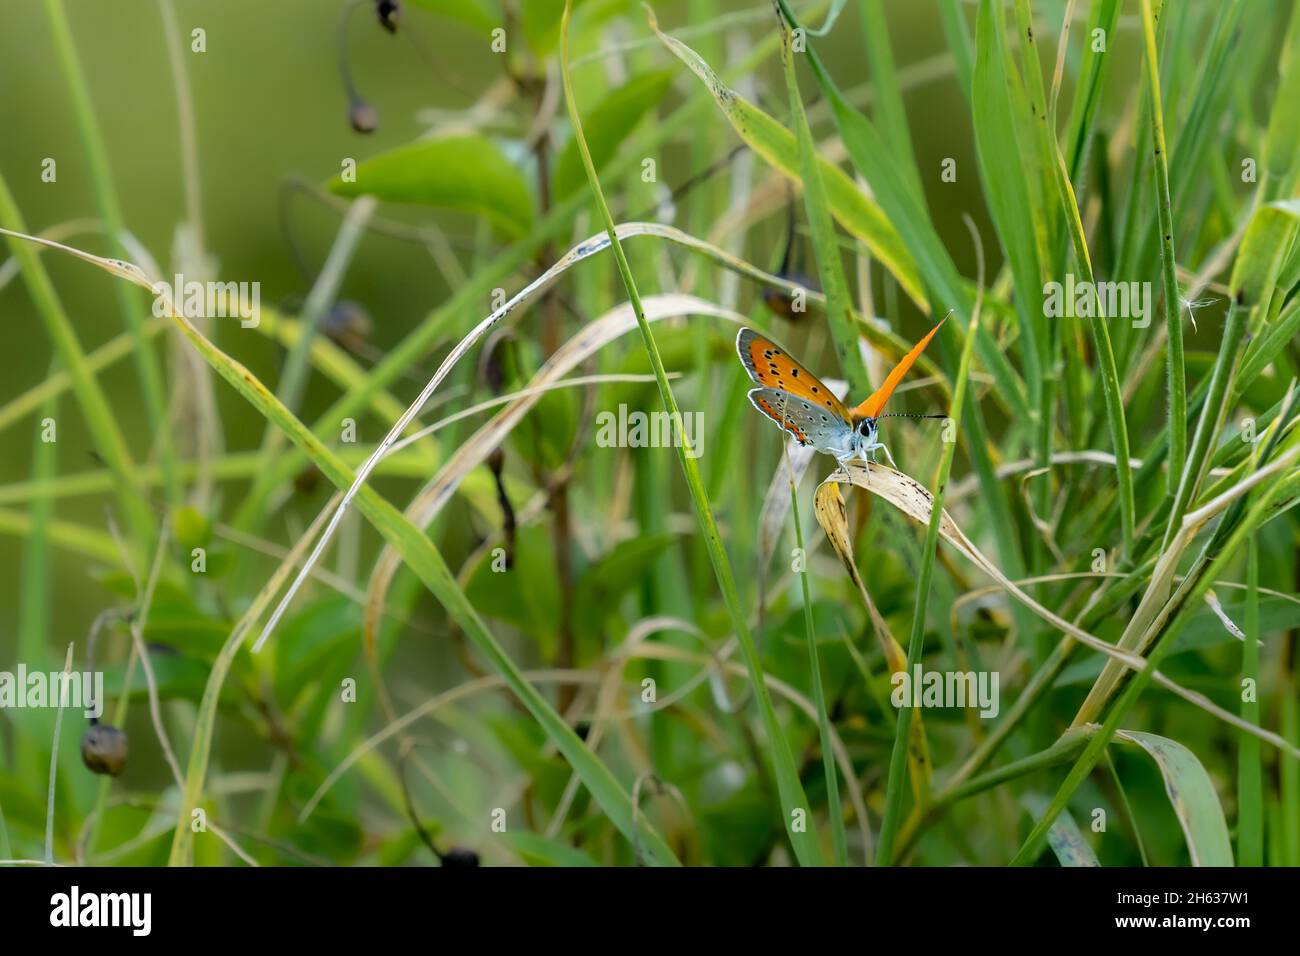 Soft focus of large copper butterfly on a grass blade at a field Stock Photo